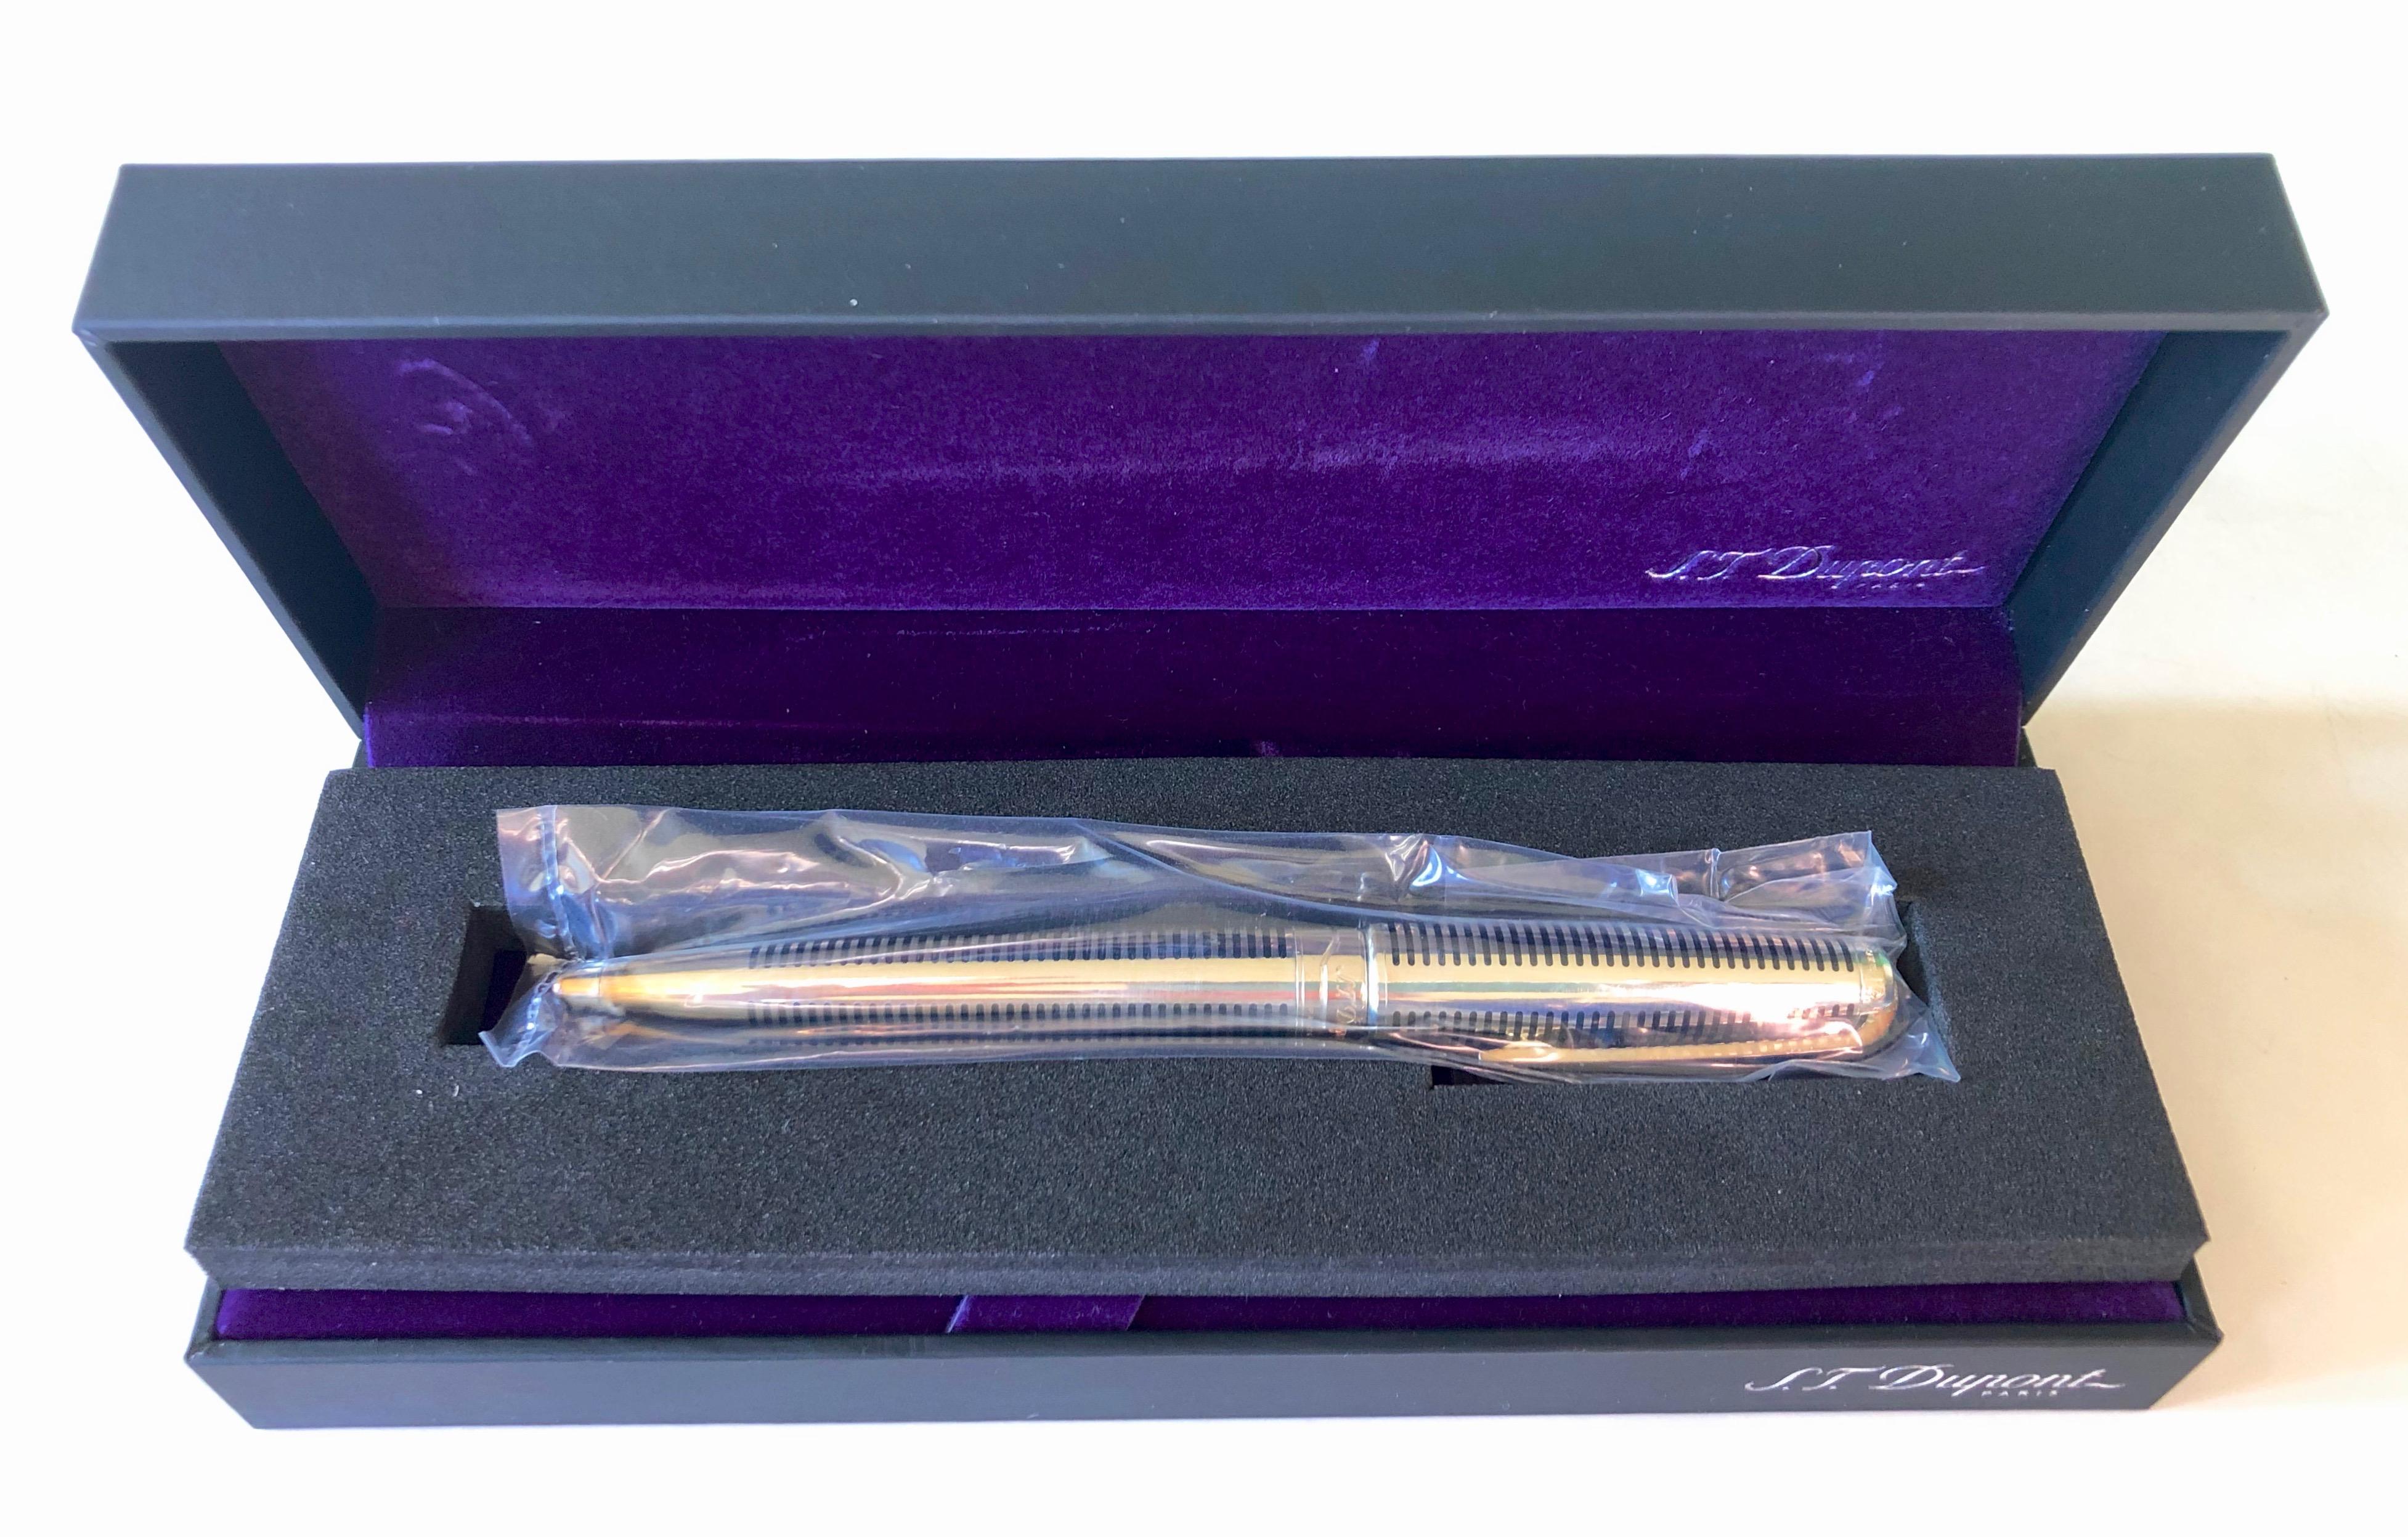 This is a French S.T. Dupont Paris Olympio brand new large solid silver ball pen, in it's original case. The pen is still sealed in it's original plastic. It comes with papers and a 2 year worldwide warranty.